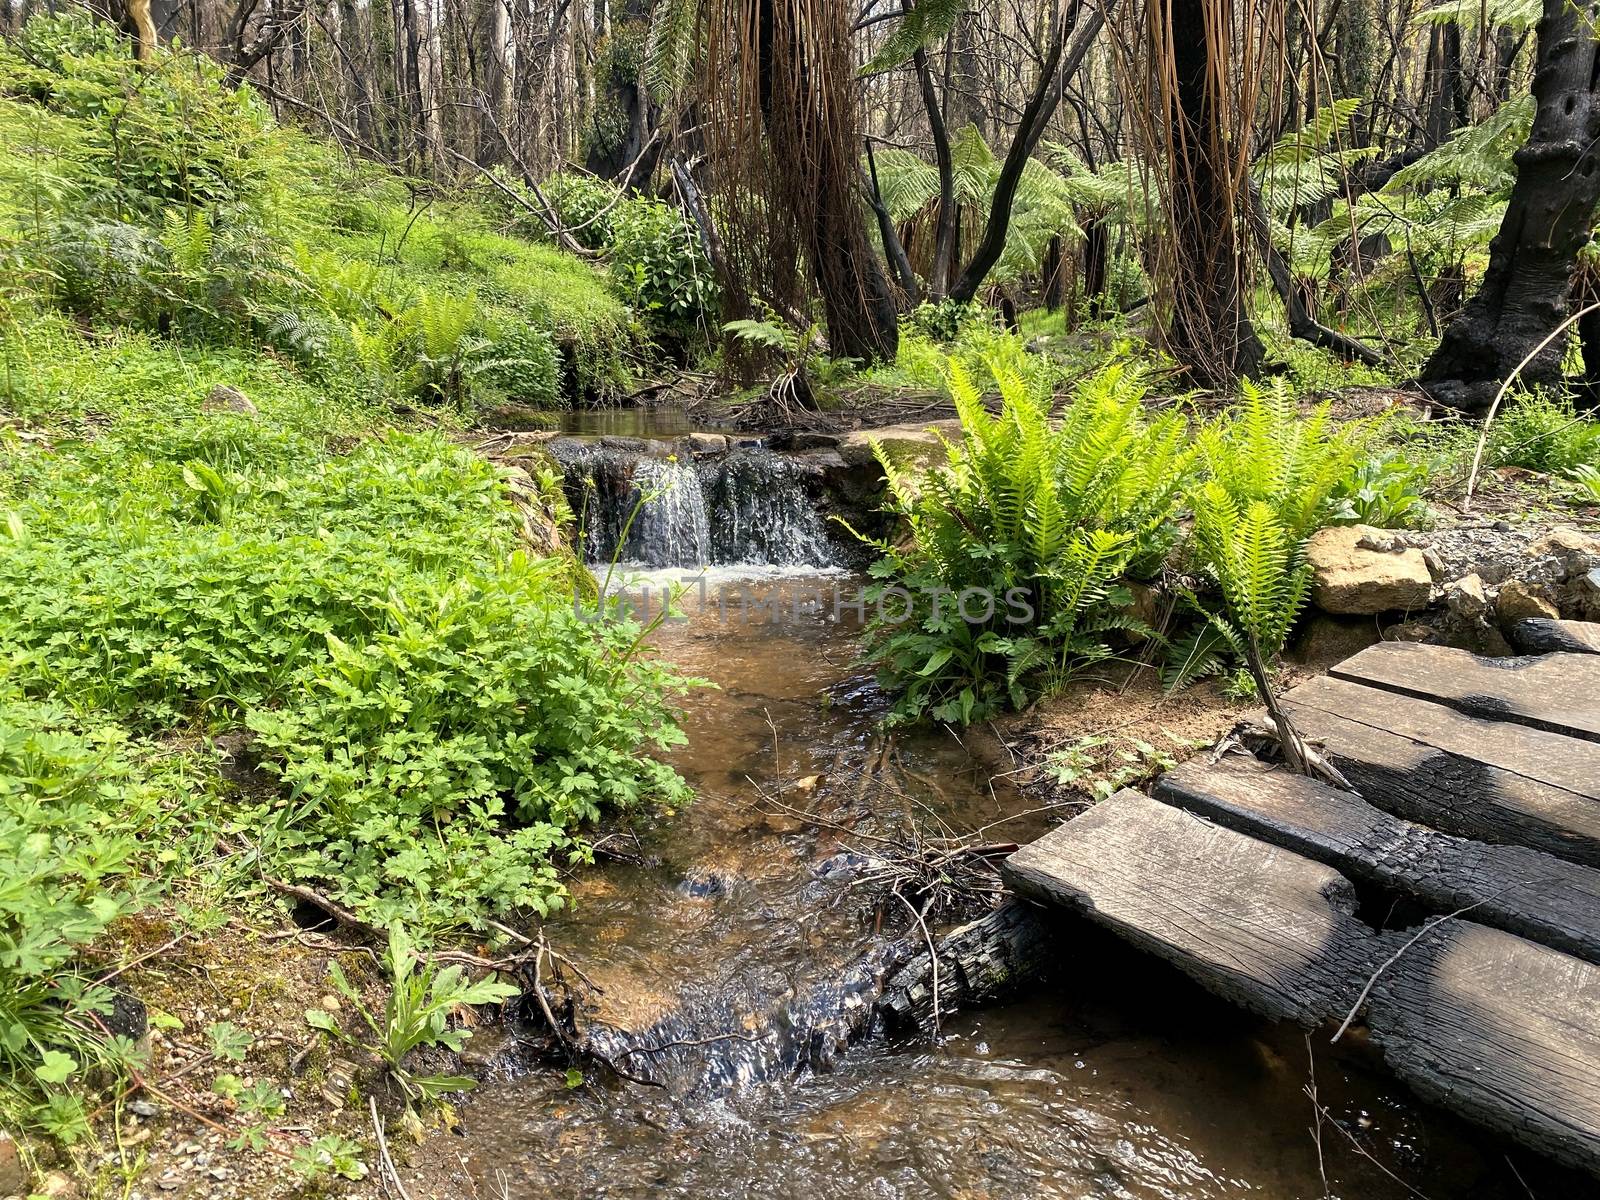 A small waterfall after a bushfire next to a small burnt bridge